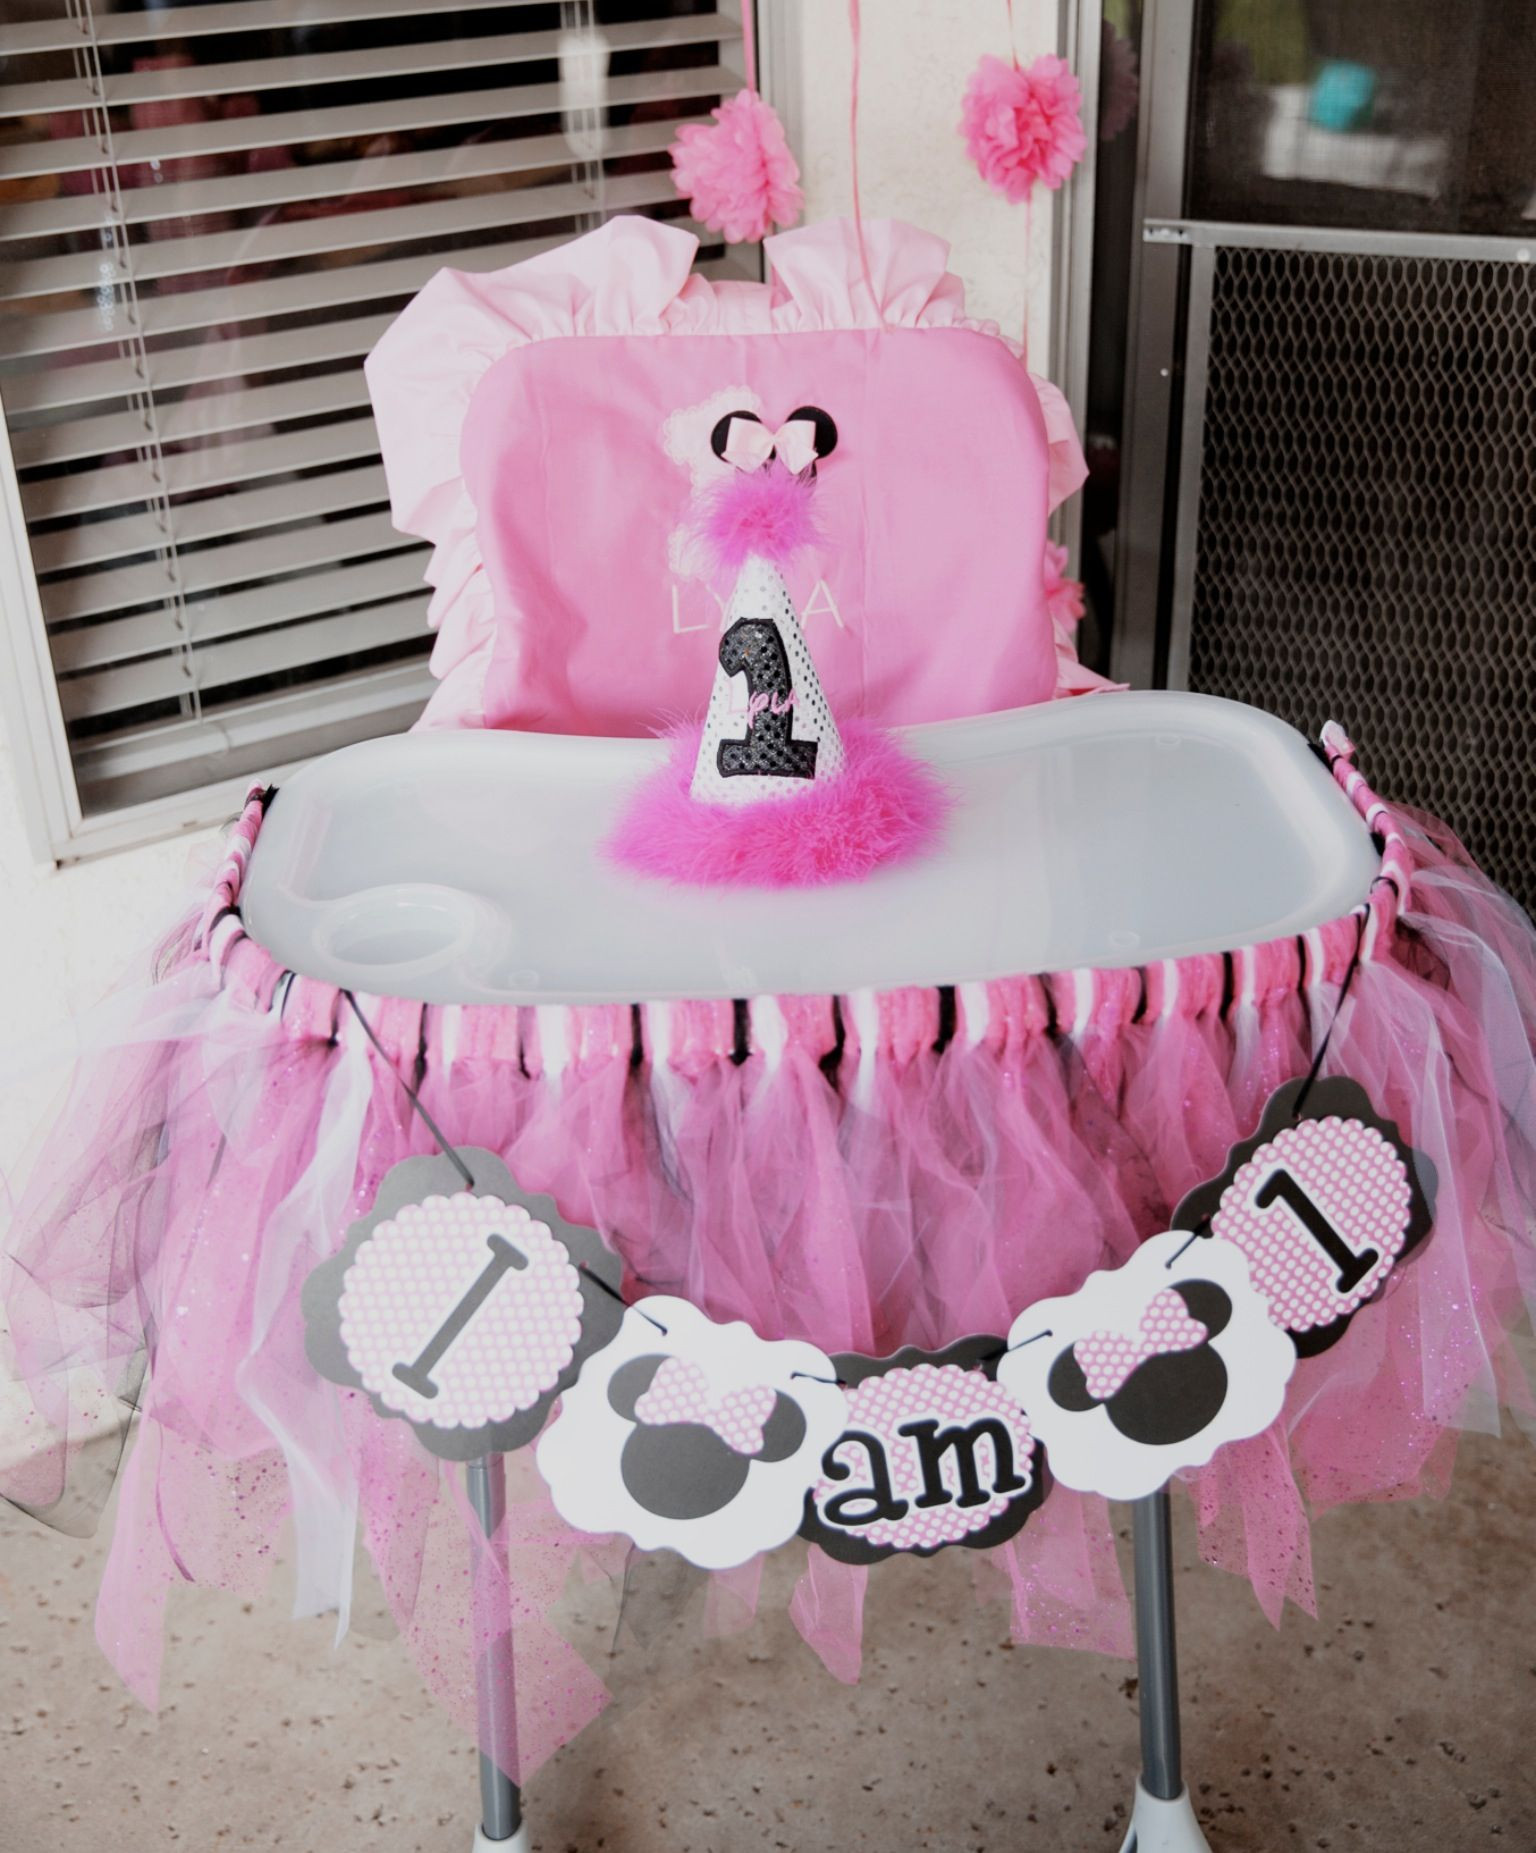 Minnie Mouse 1st Birthday Party
 The 25 best Minnie mouse high chair ideas on Pinterest